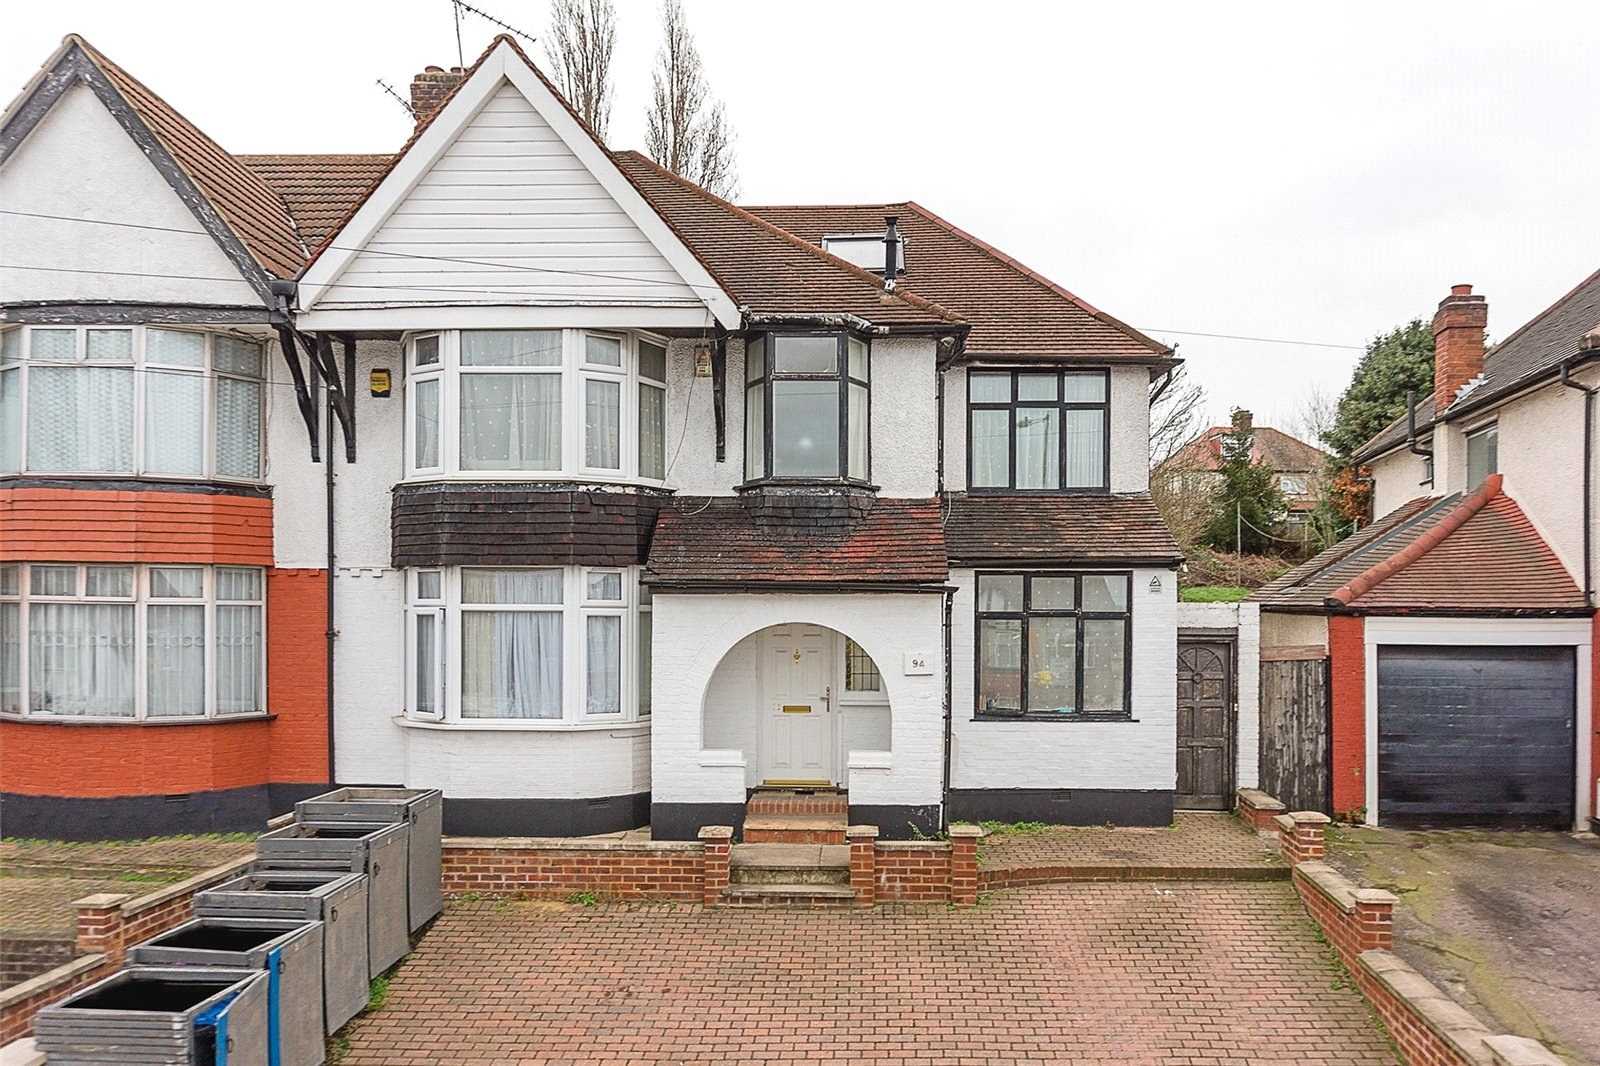 House in Dollis Hill, Tanfield Avenue 12317102